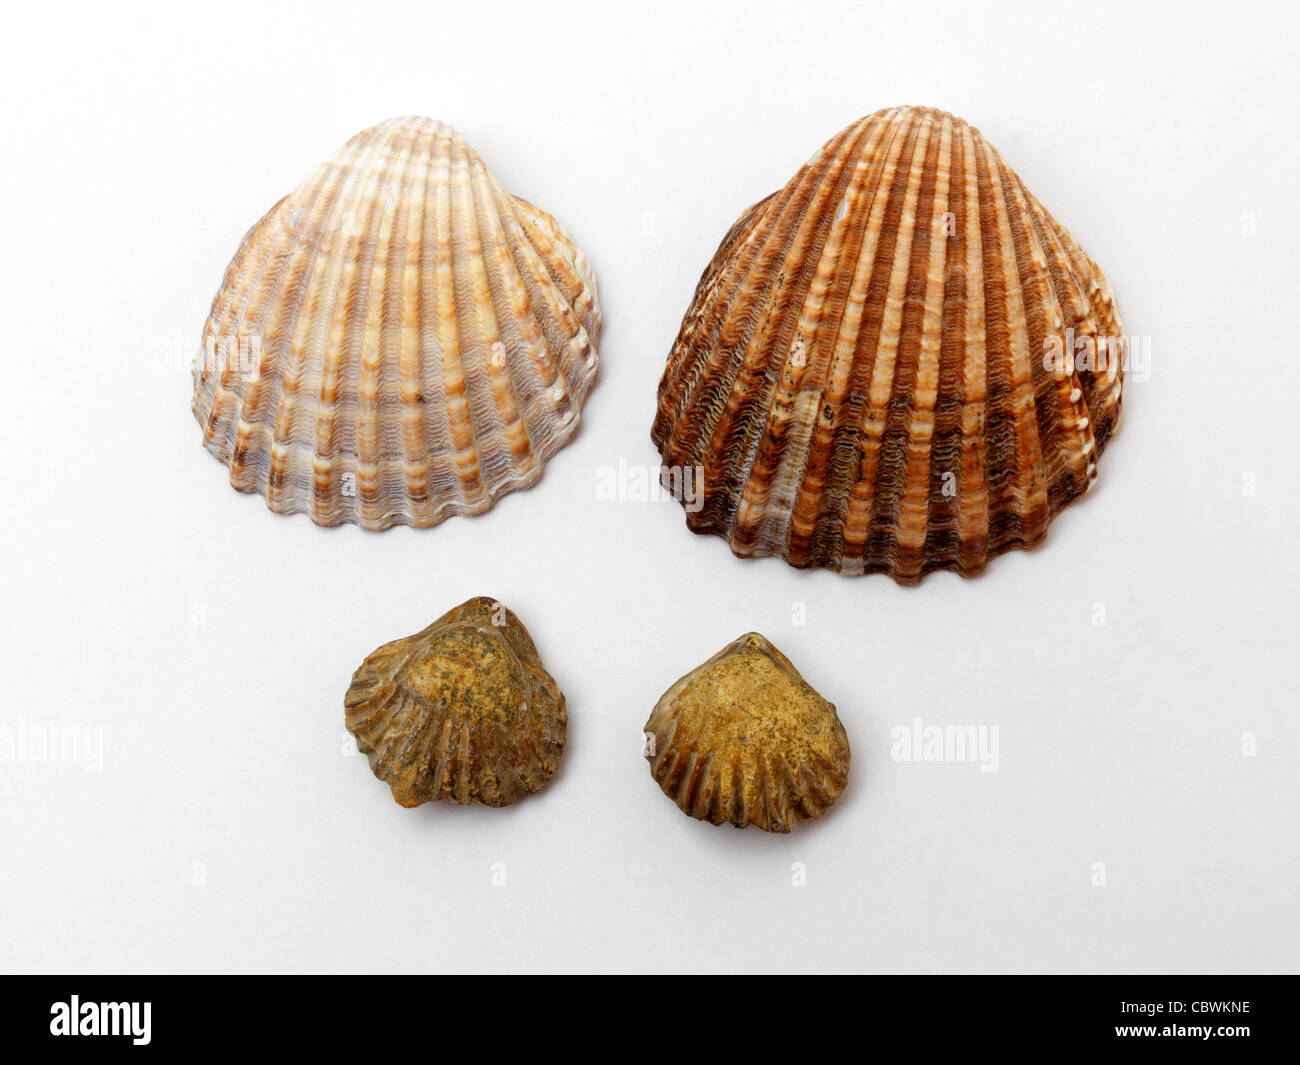 Cockle Shells With Fossils Of Shells Stock Photo